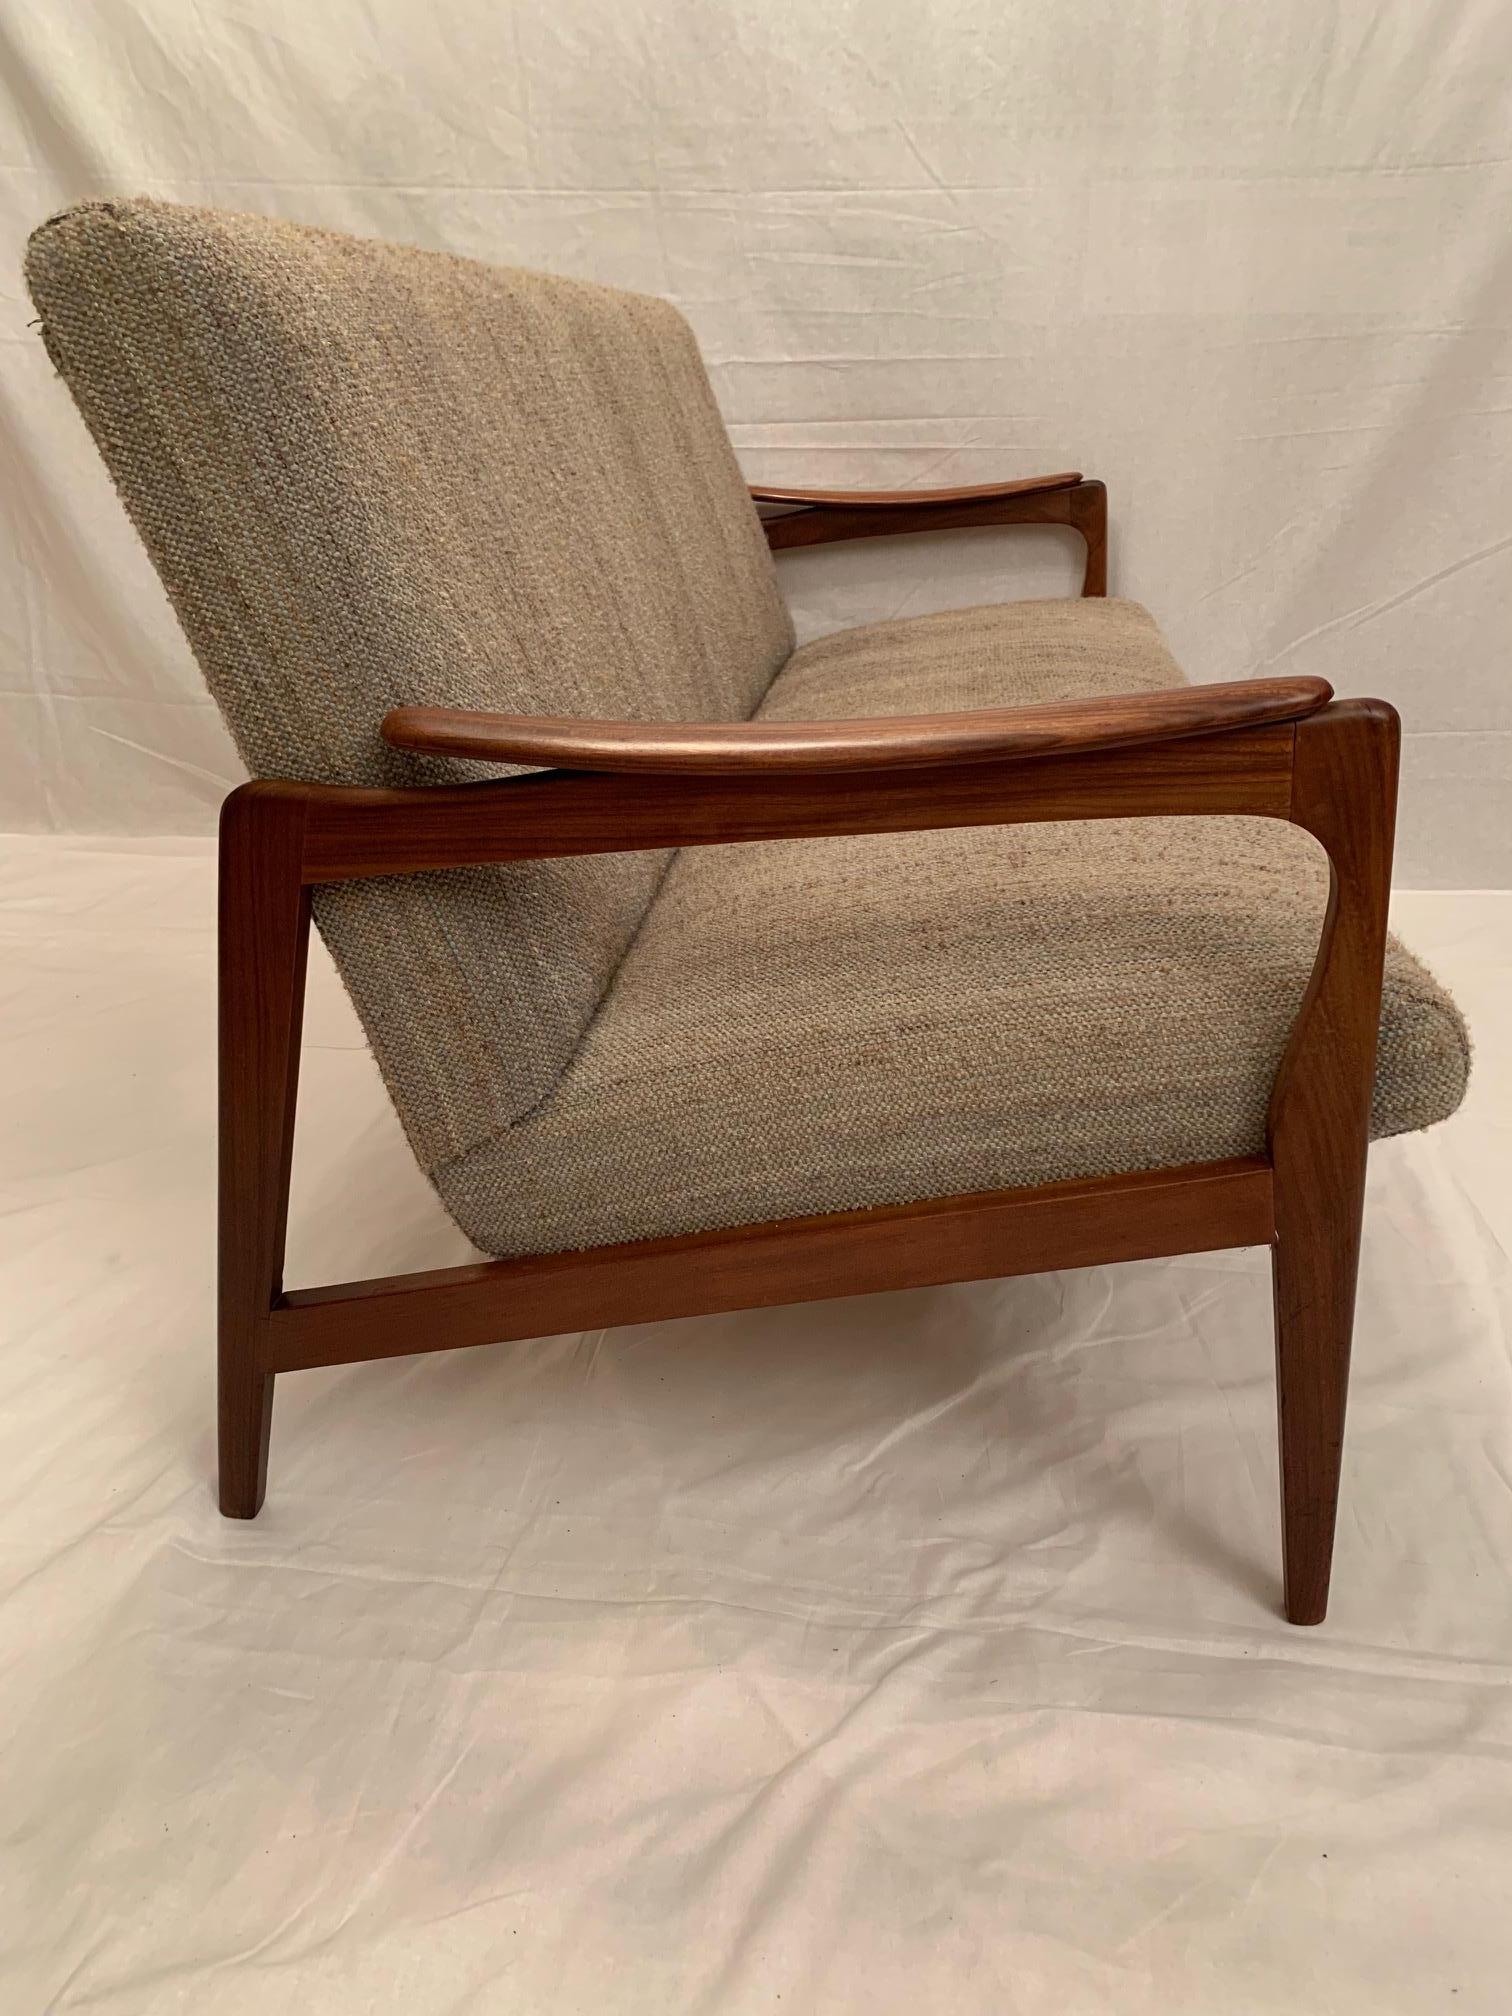 Designer sofa Rolf Rastad & Adolf Relling, Dokka Mobler from the 1960s fully original, without renovation. Joinery made from rosewood. The sofa is in very good condition, after professional upholstery. Attractive, classic form.